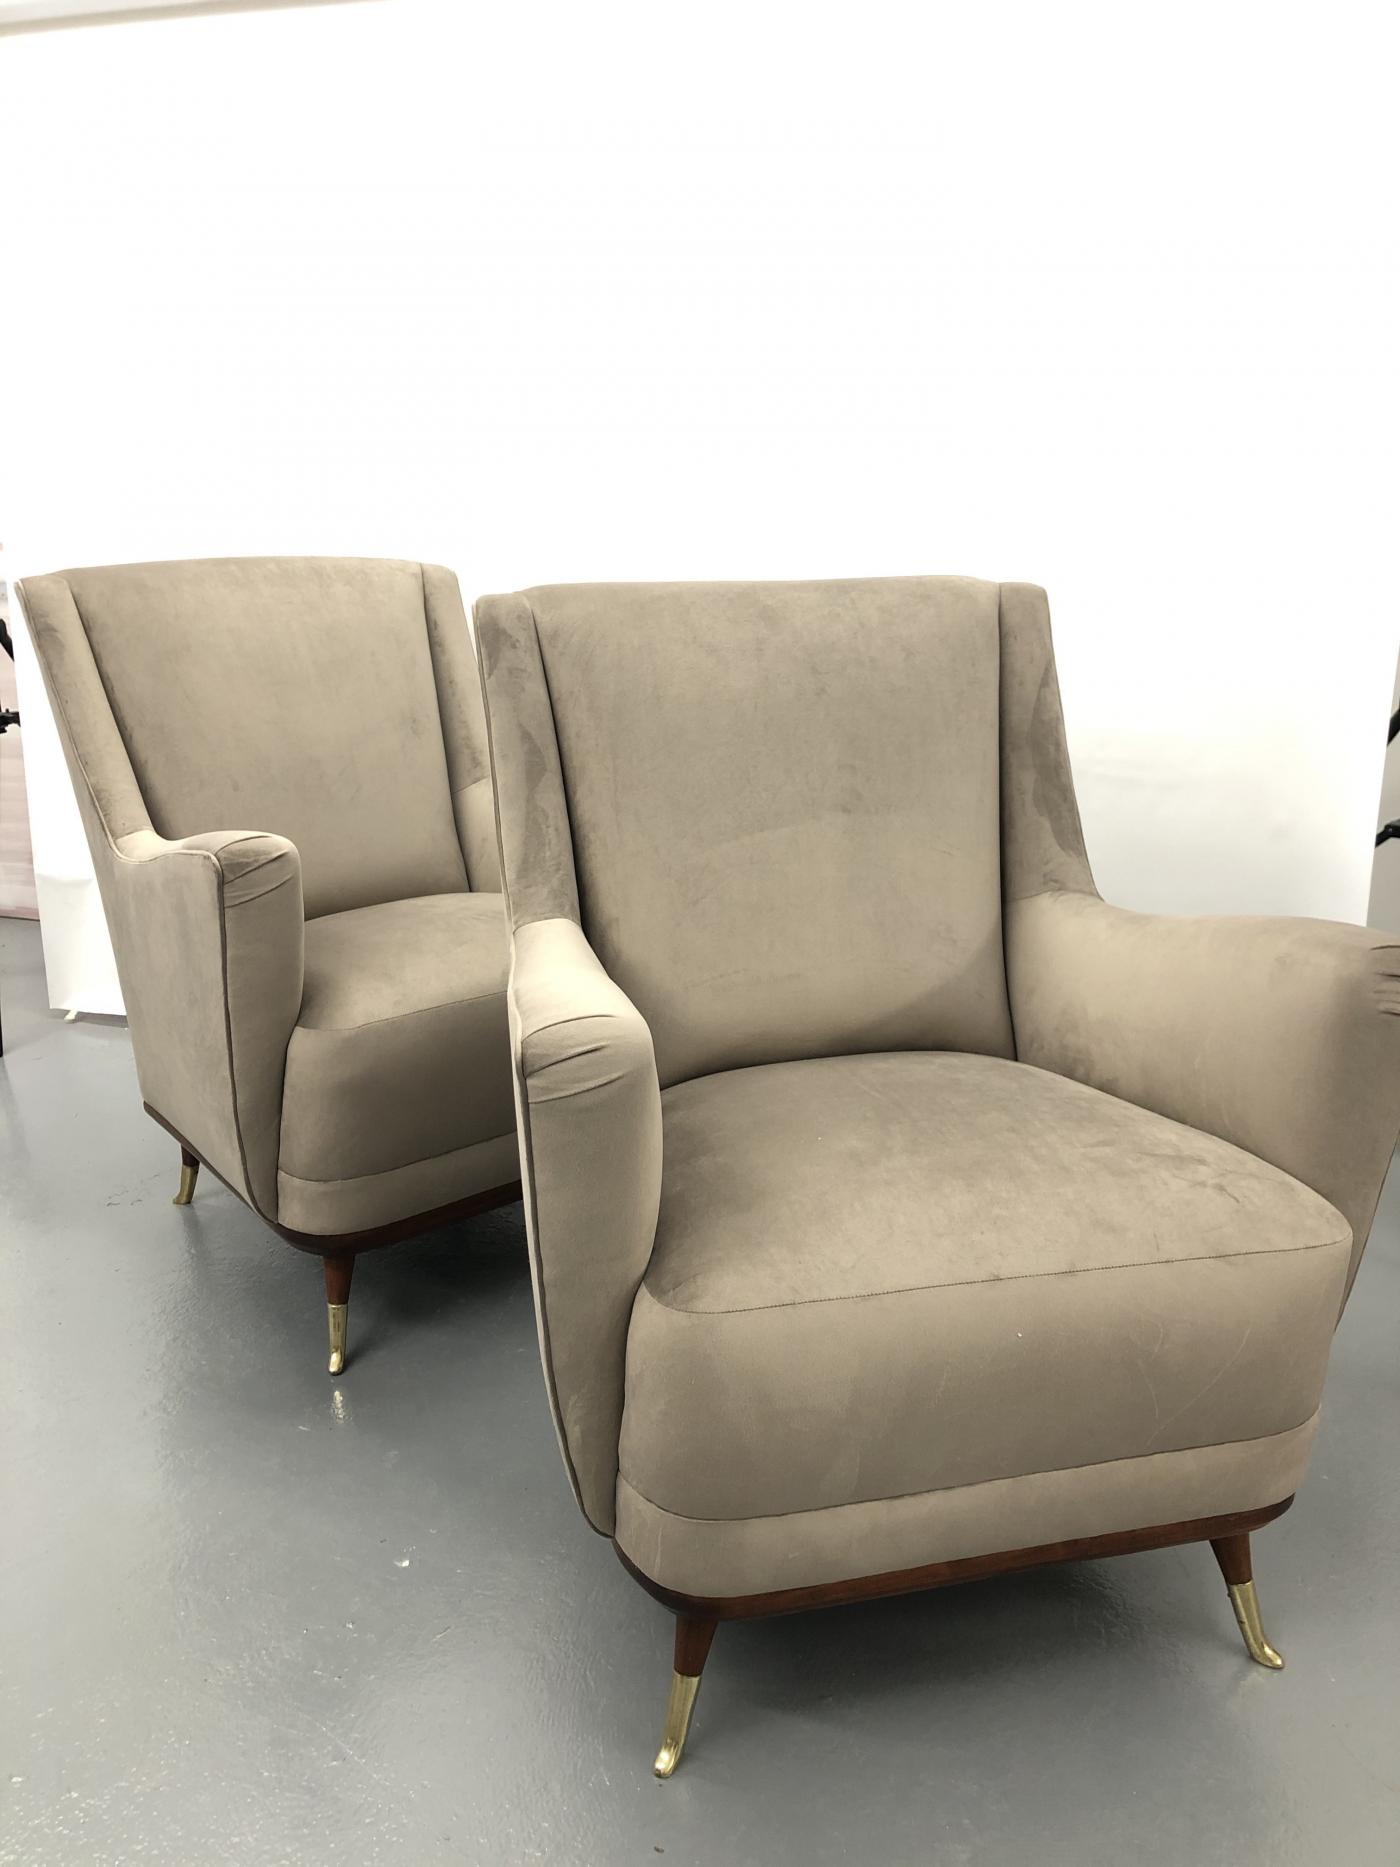 Pair of Mid Century Club Chairs.